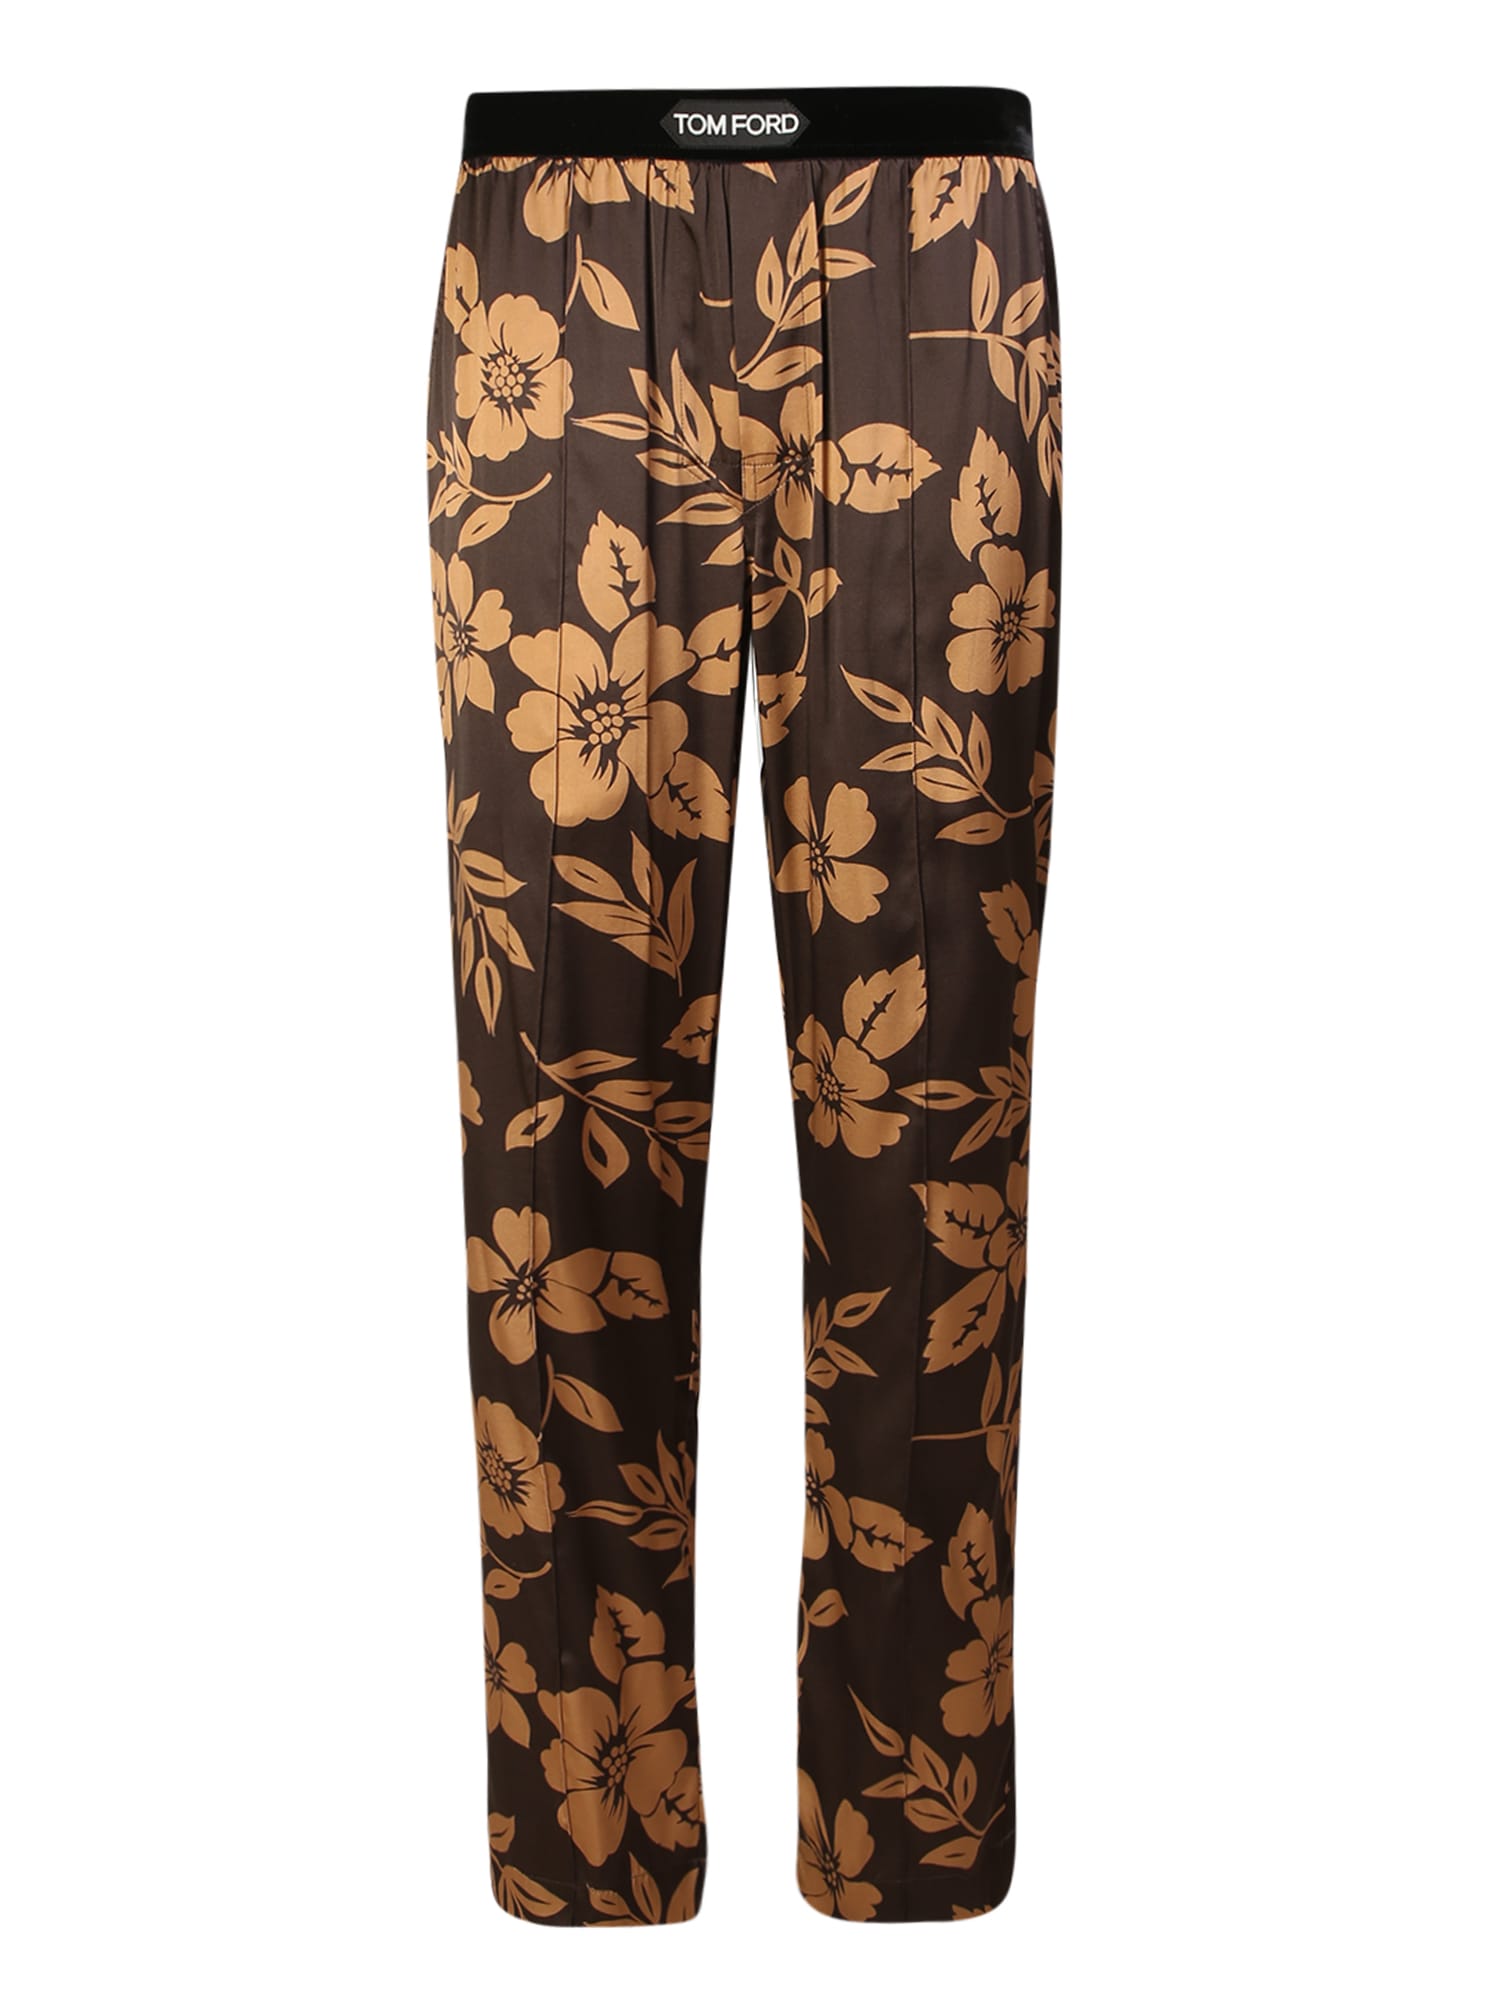 Silk Pajama-style Pants For An Elevated Look By Tom Ford